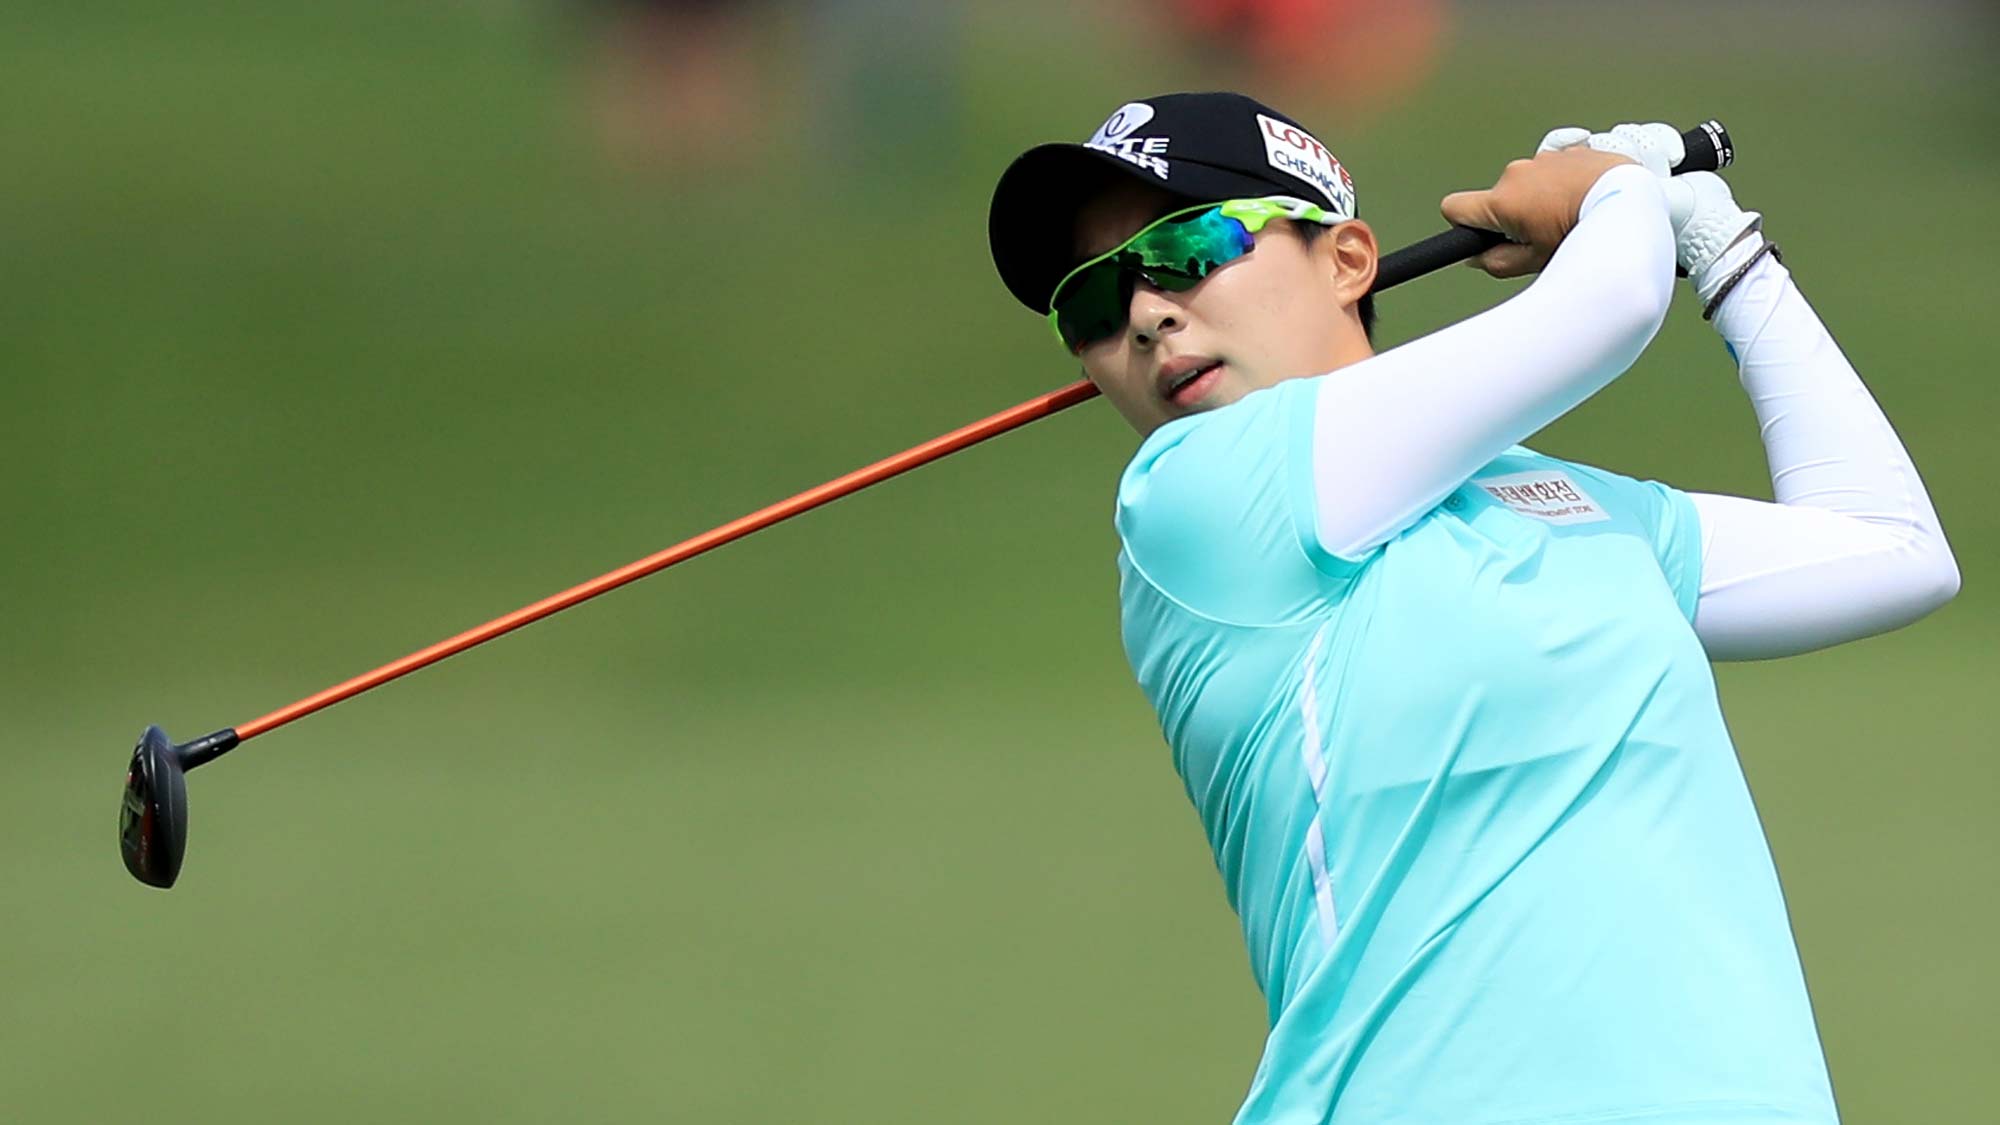 Hyo Joo Kim of South Korea plays her second shot on the par 5, 11th hole during the first round of the 2019 KPMG Women's PGA Championship